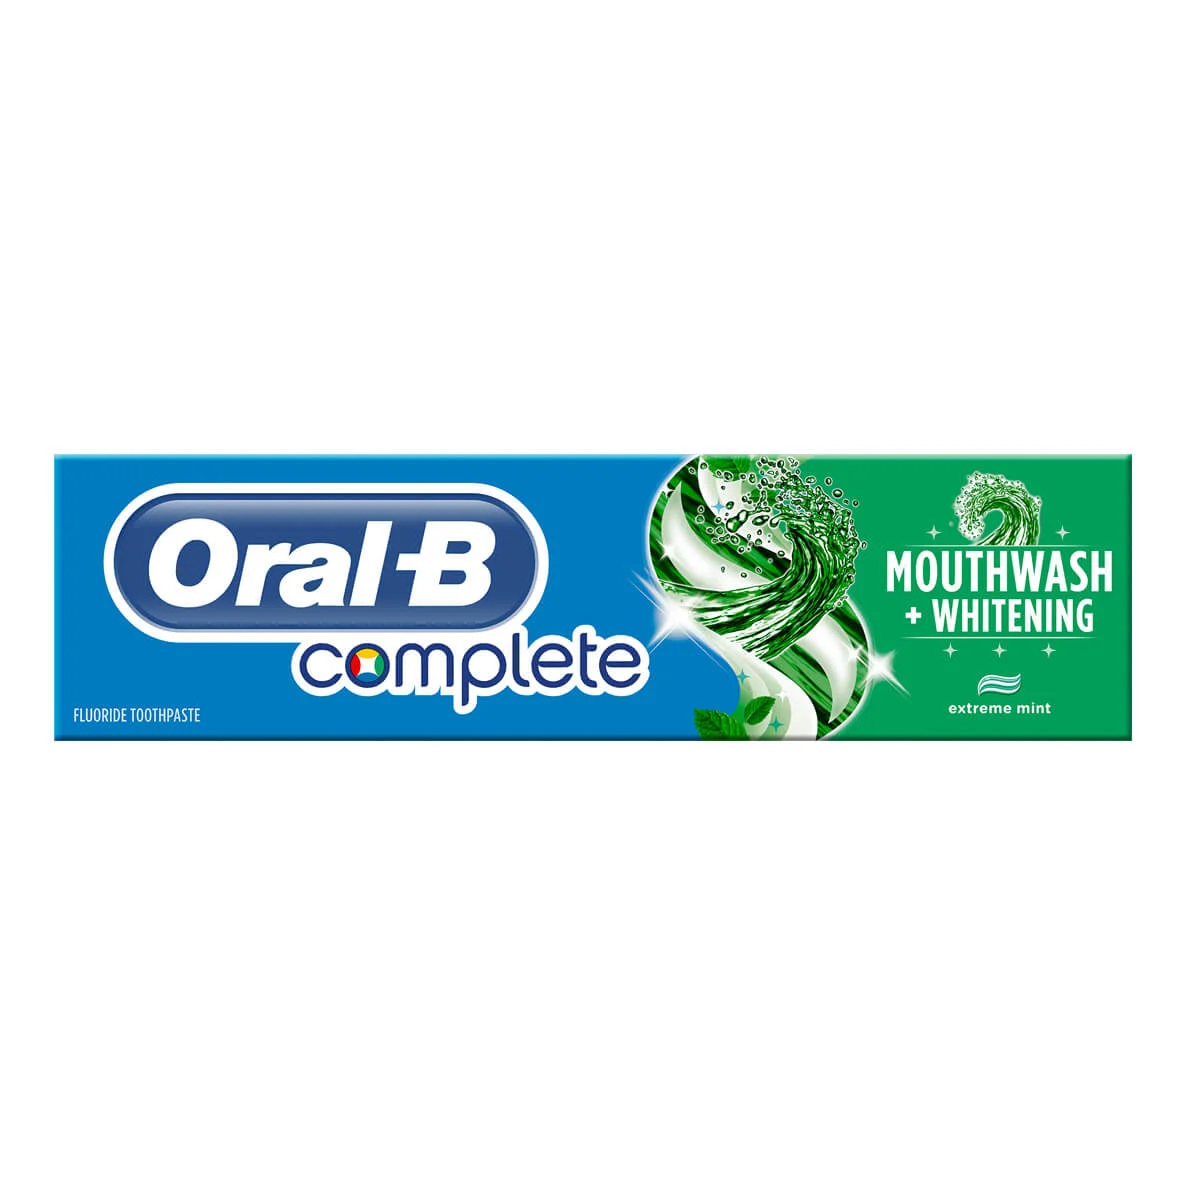 Oral-B Complete Mouthwash + Whitening Toothpaste undefined